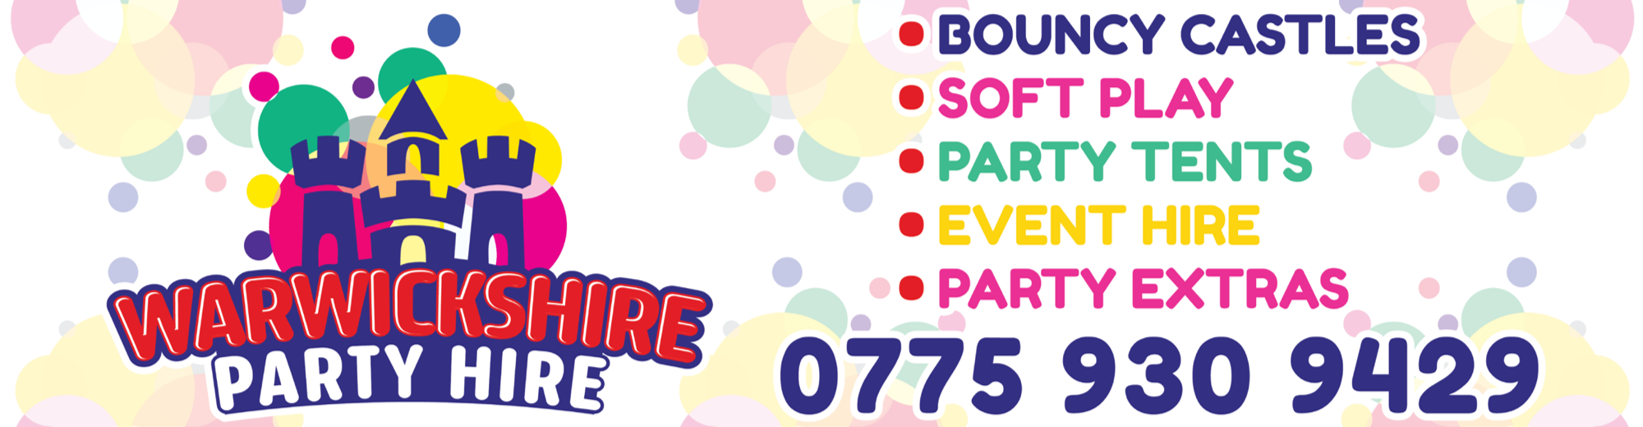 Warwickshire Party Hire's main image